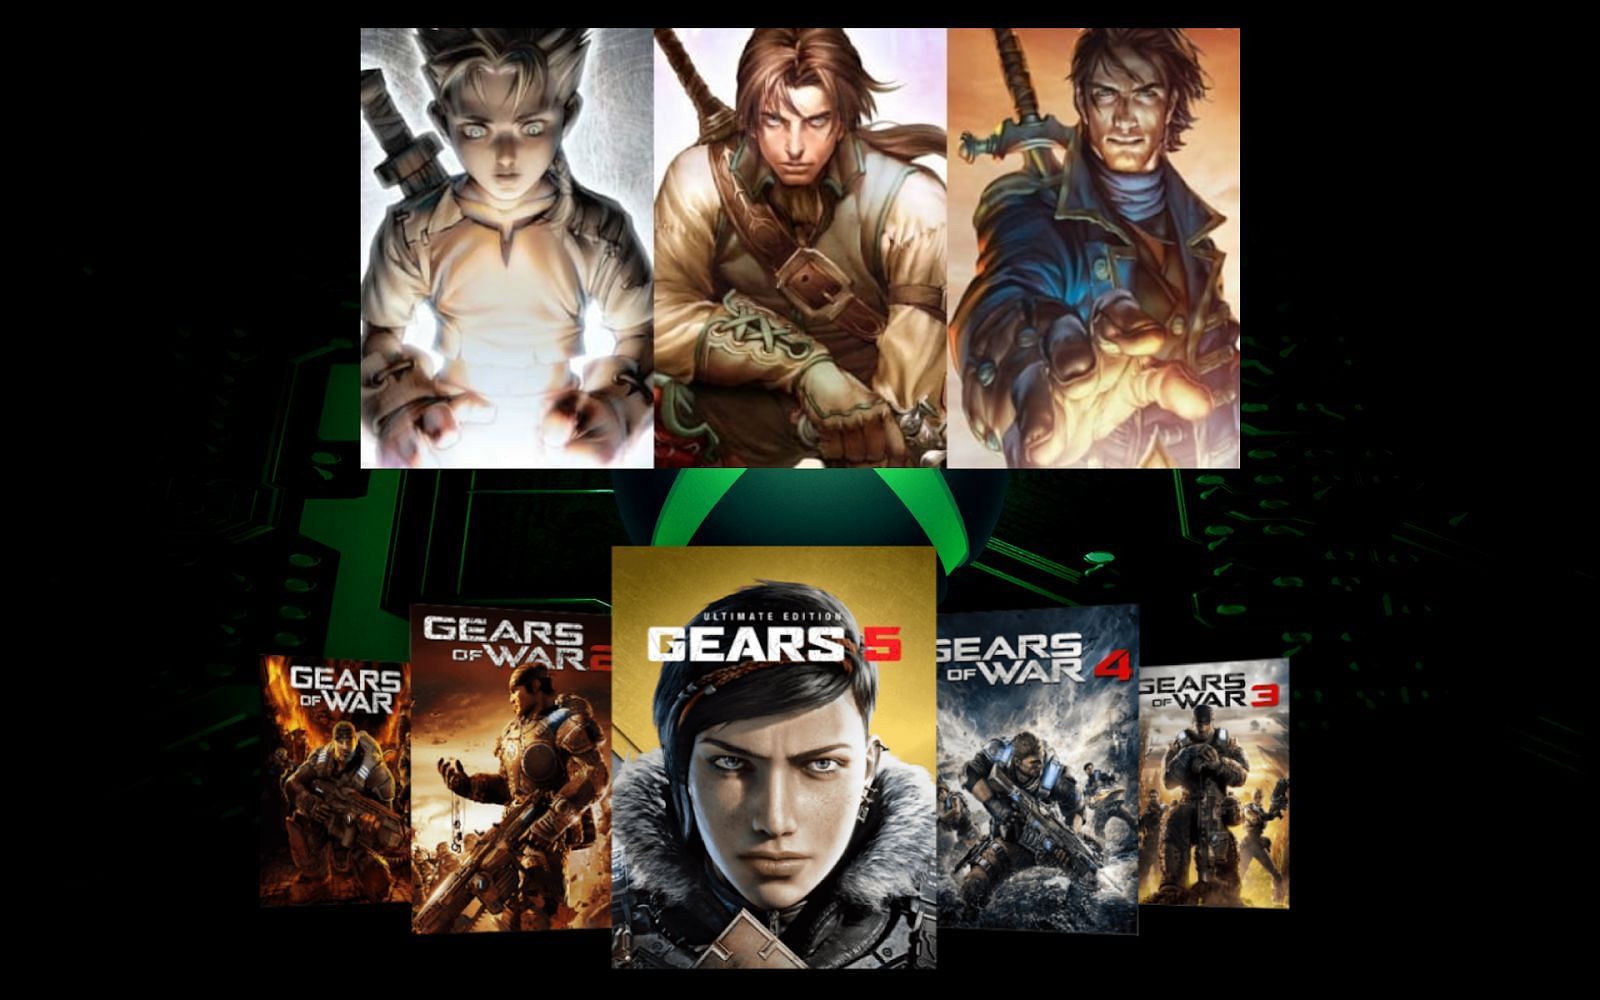 Fable or Gears might get a collection soon (Image by Sportskeeda)